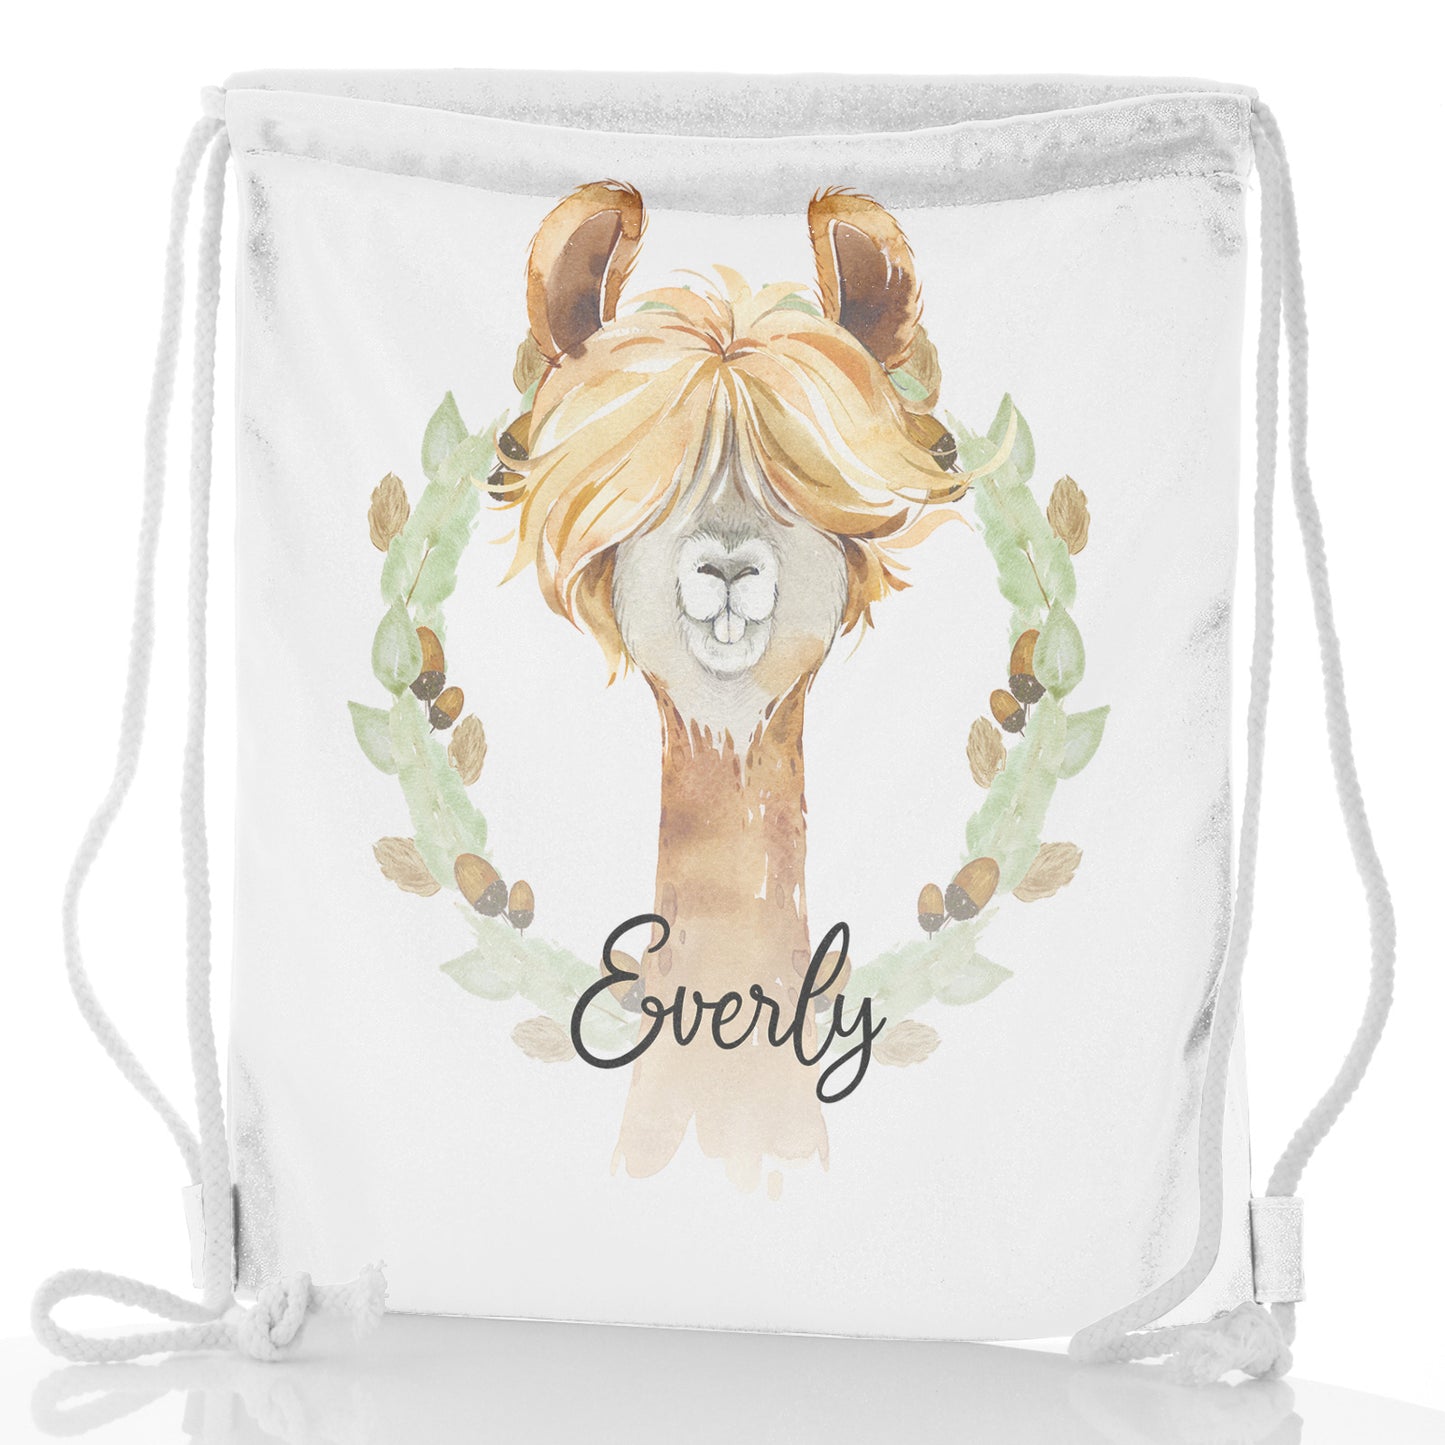 Personalised Glitter Drawstring Backpack with Brown Alpaca Acorn Wreath and Cute Text